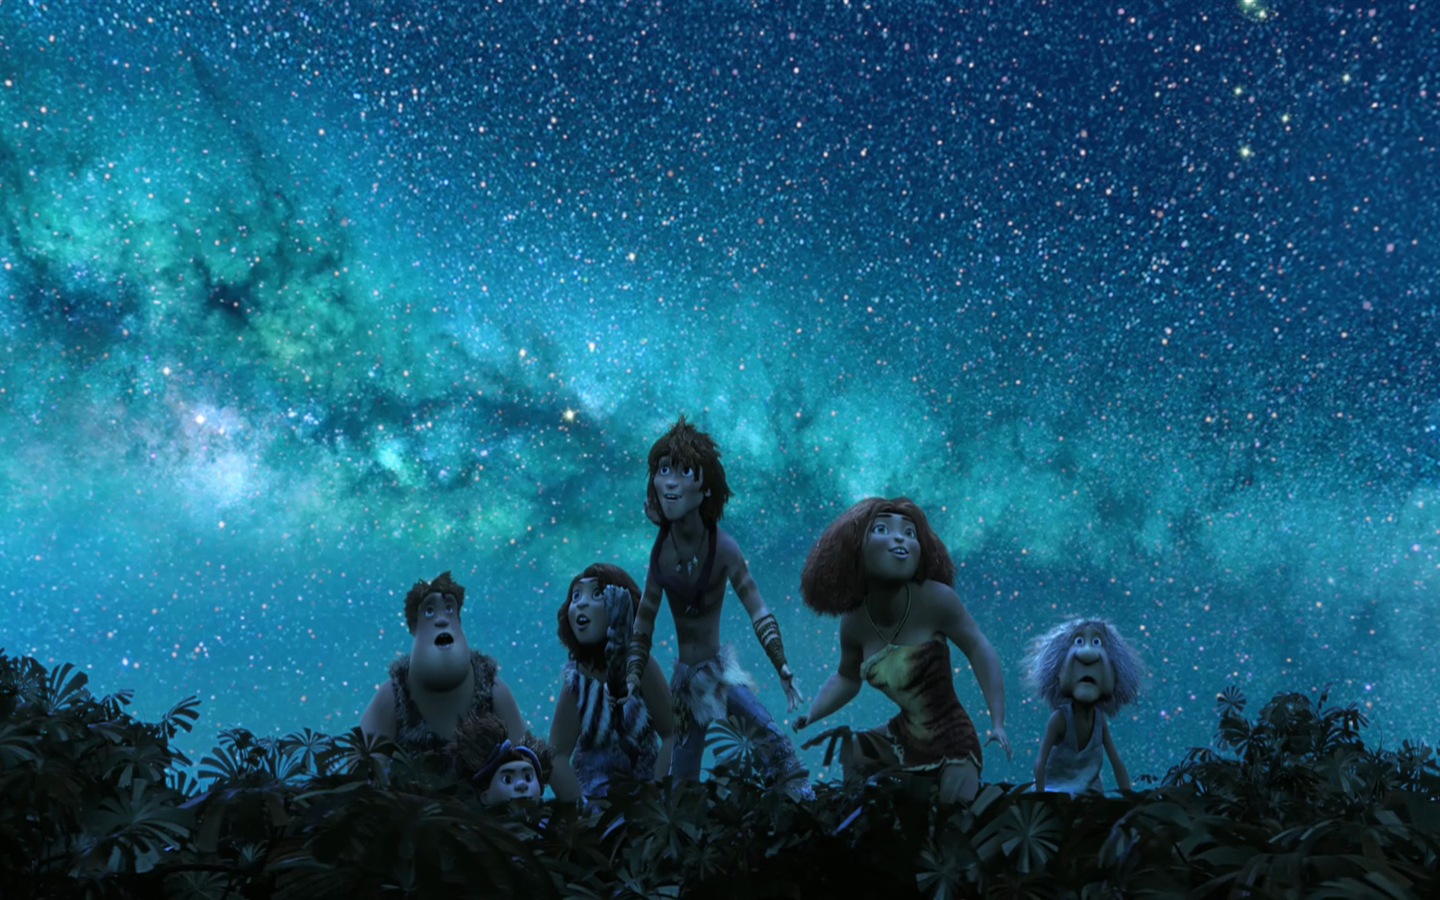 V Croods HD Movie Wallpapers #16 - 1440x900